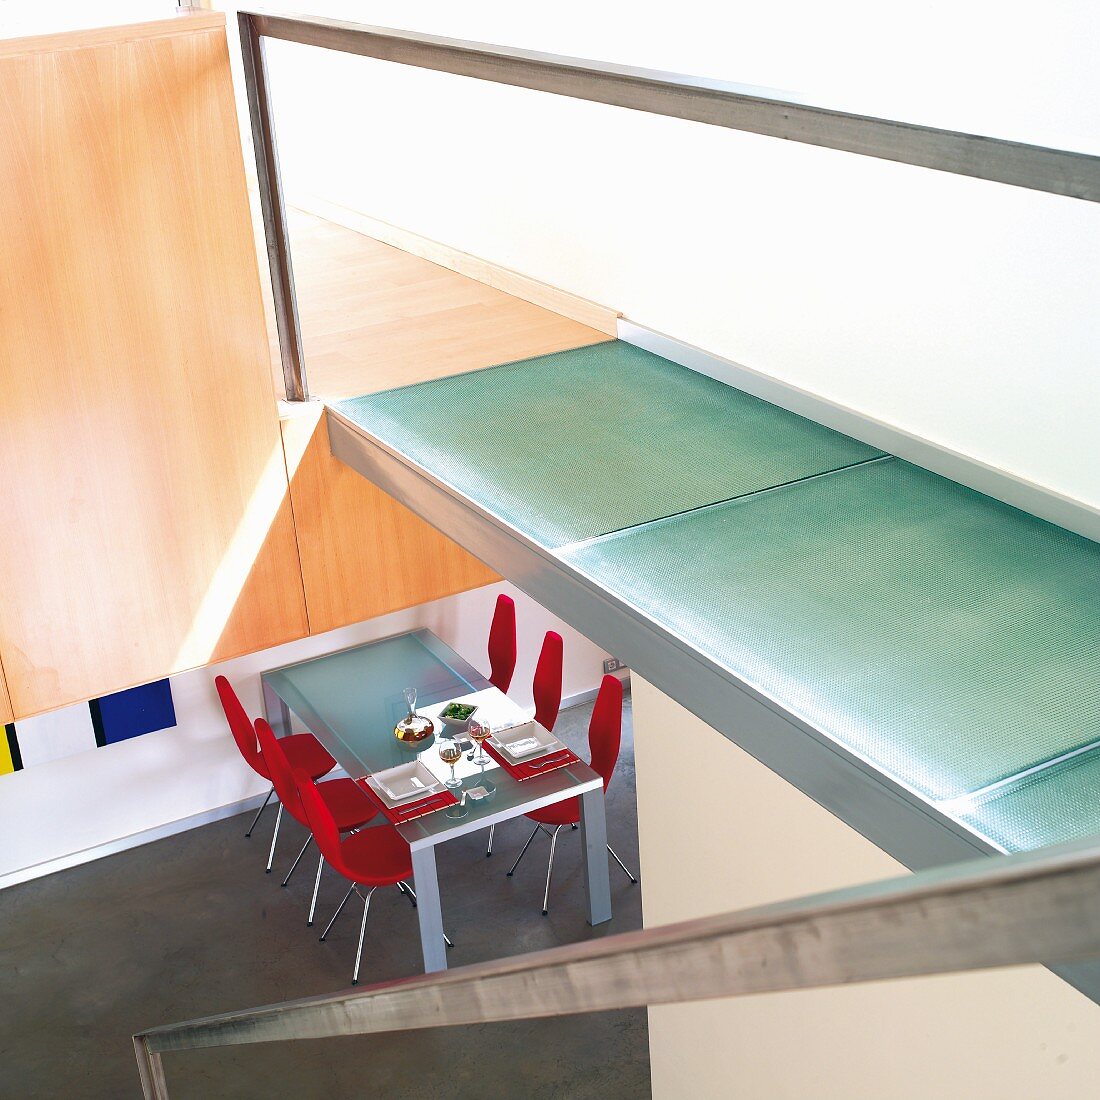 Staircase with walkway landing made from glass panels, view into open-plan dining area with table and red chairs